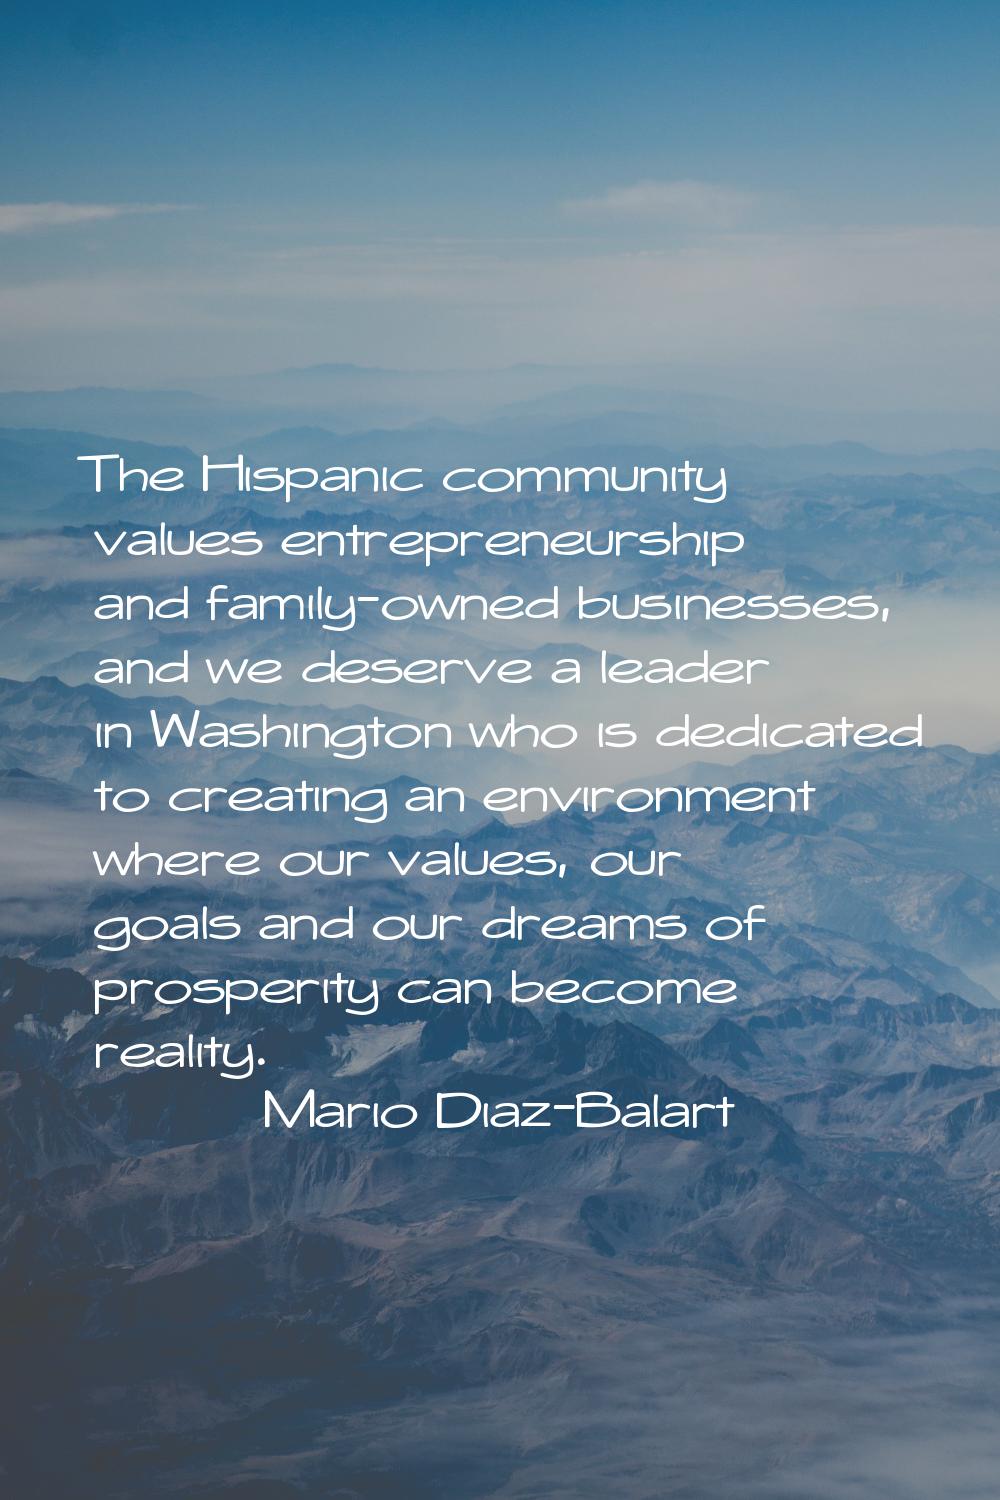 The Hispanic community values entrepreneurship and family-owned businesses, and we deserve a leader